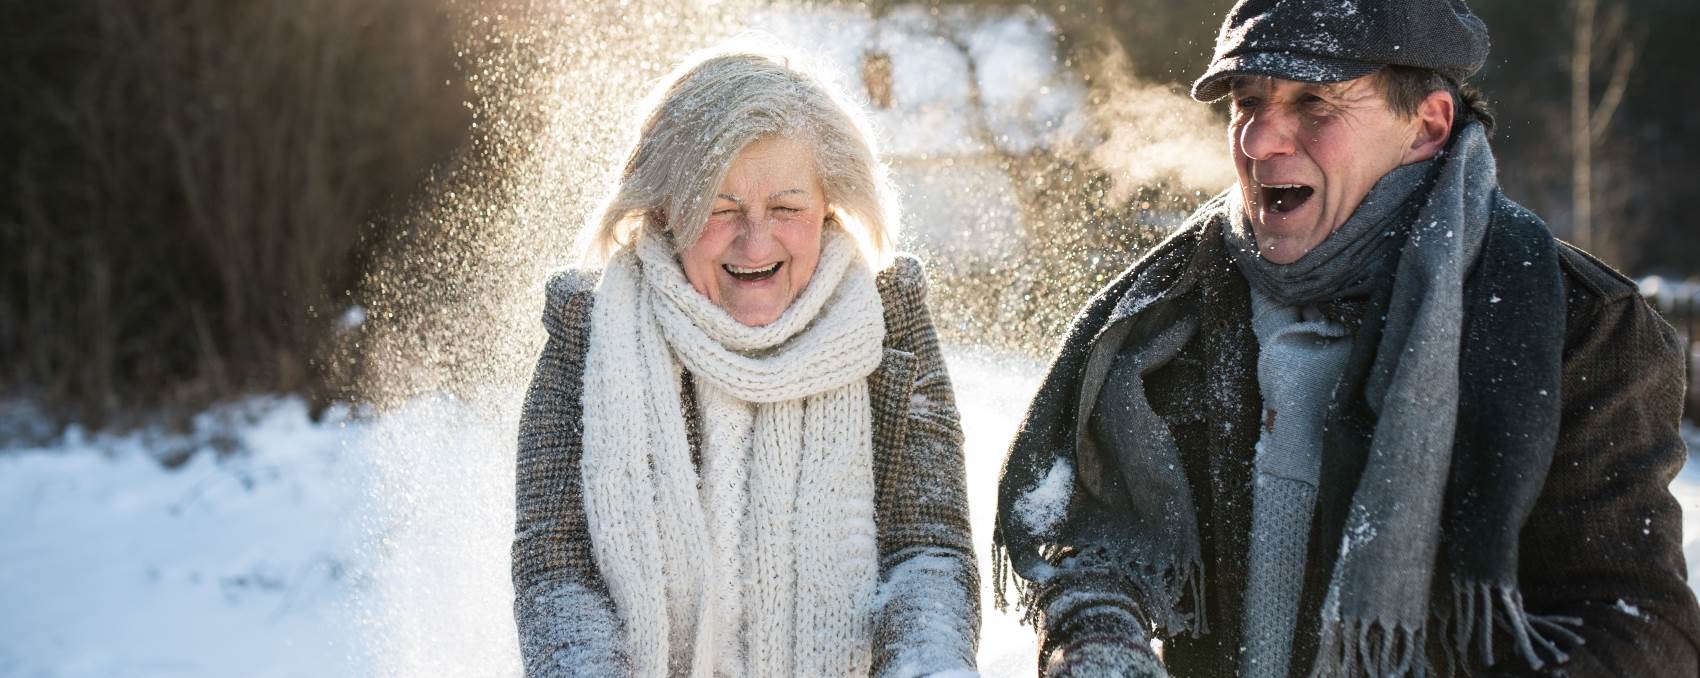 A senior man and woman enjoy a laugh in the winter.